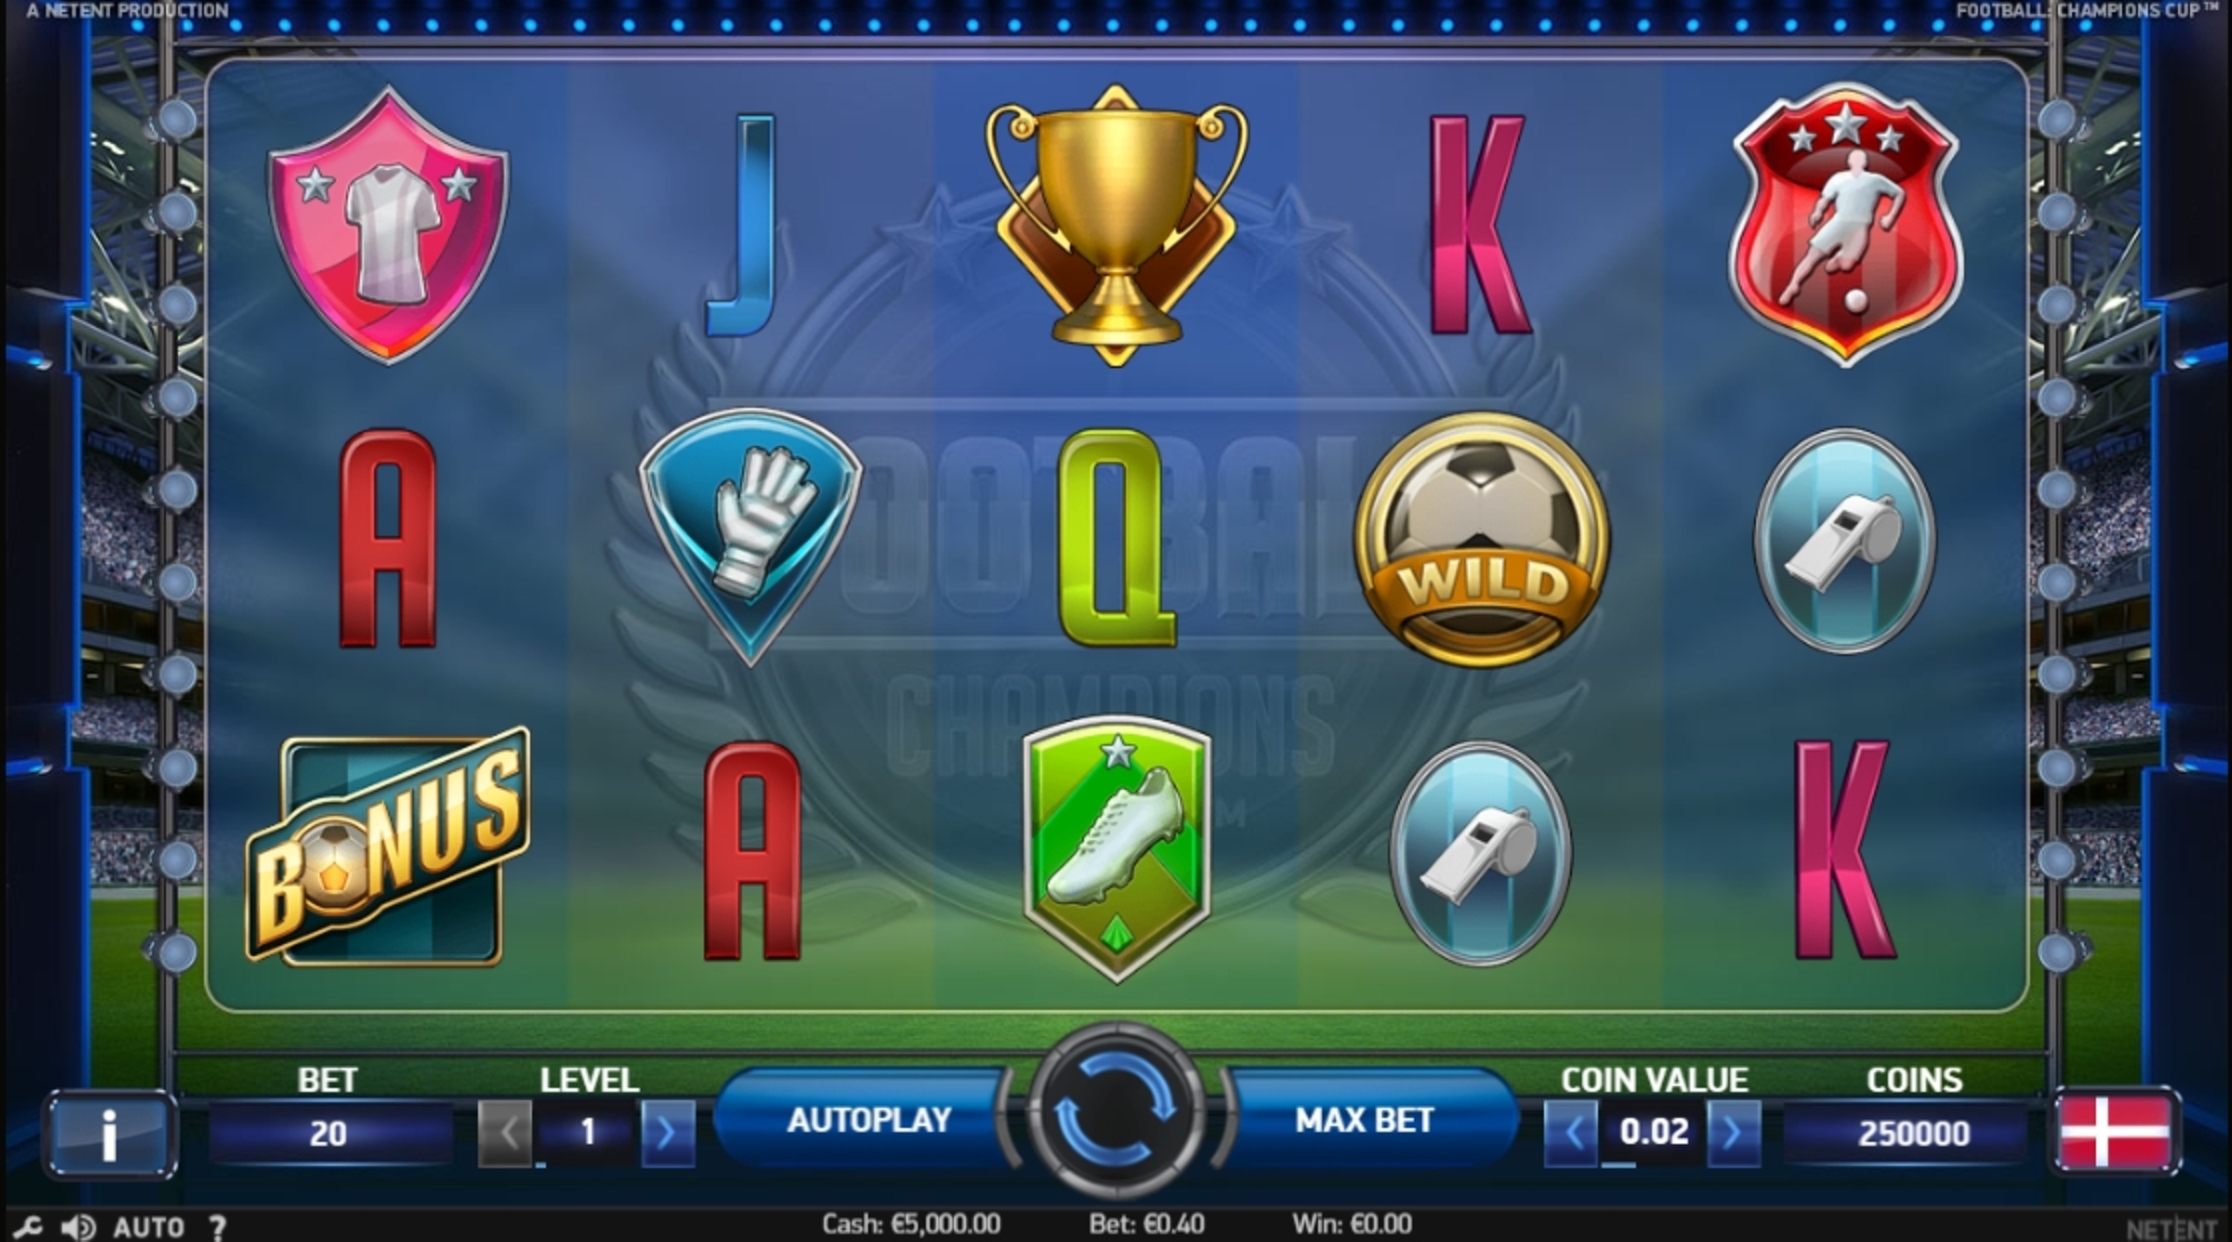 Reels in Football: Champions Cup Slot Game by NetEnt